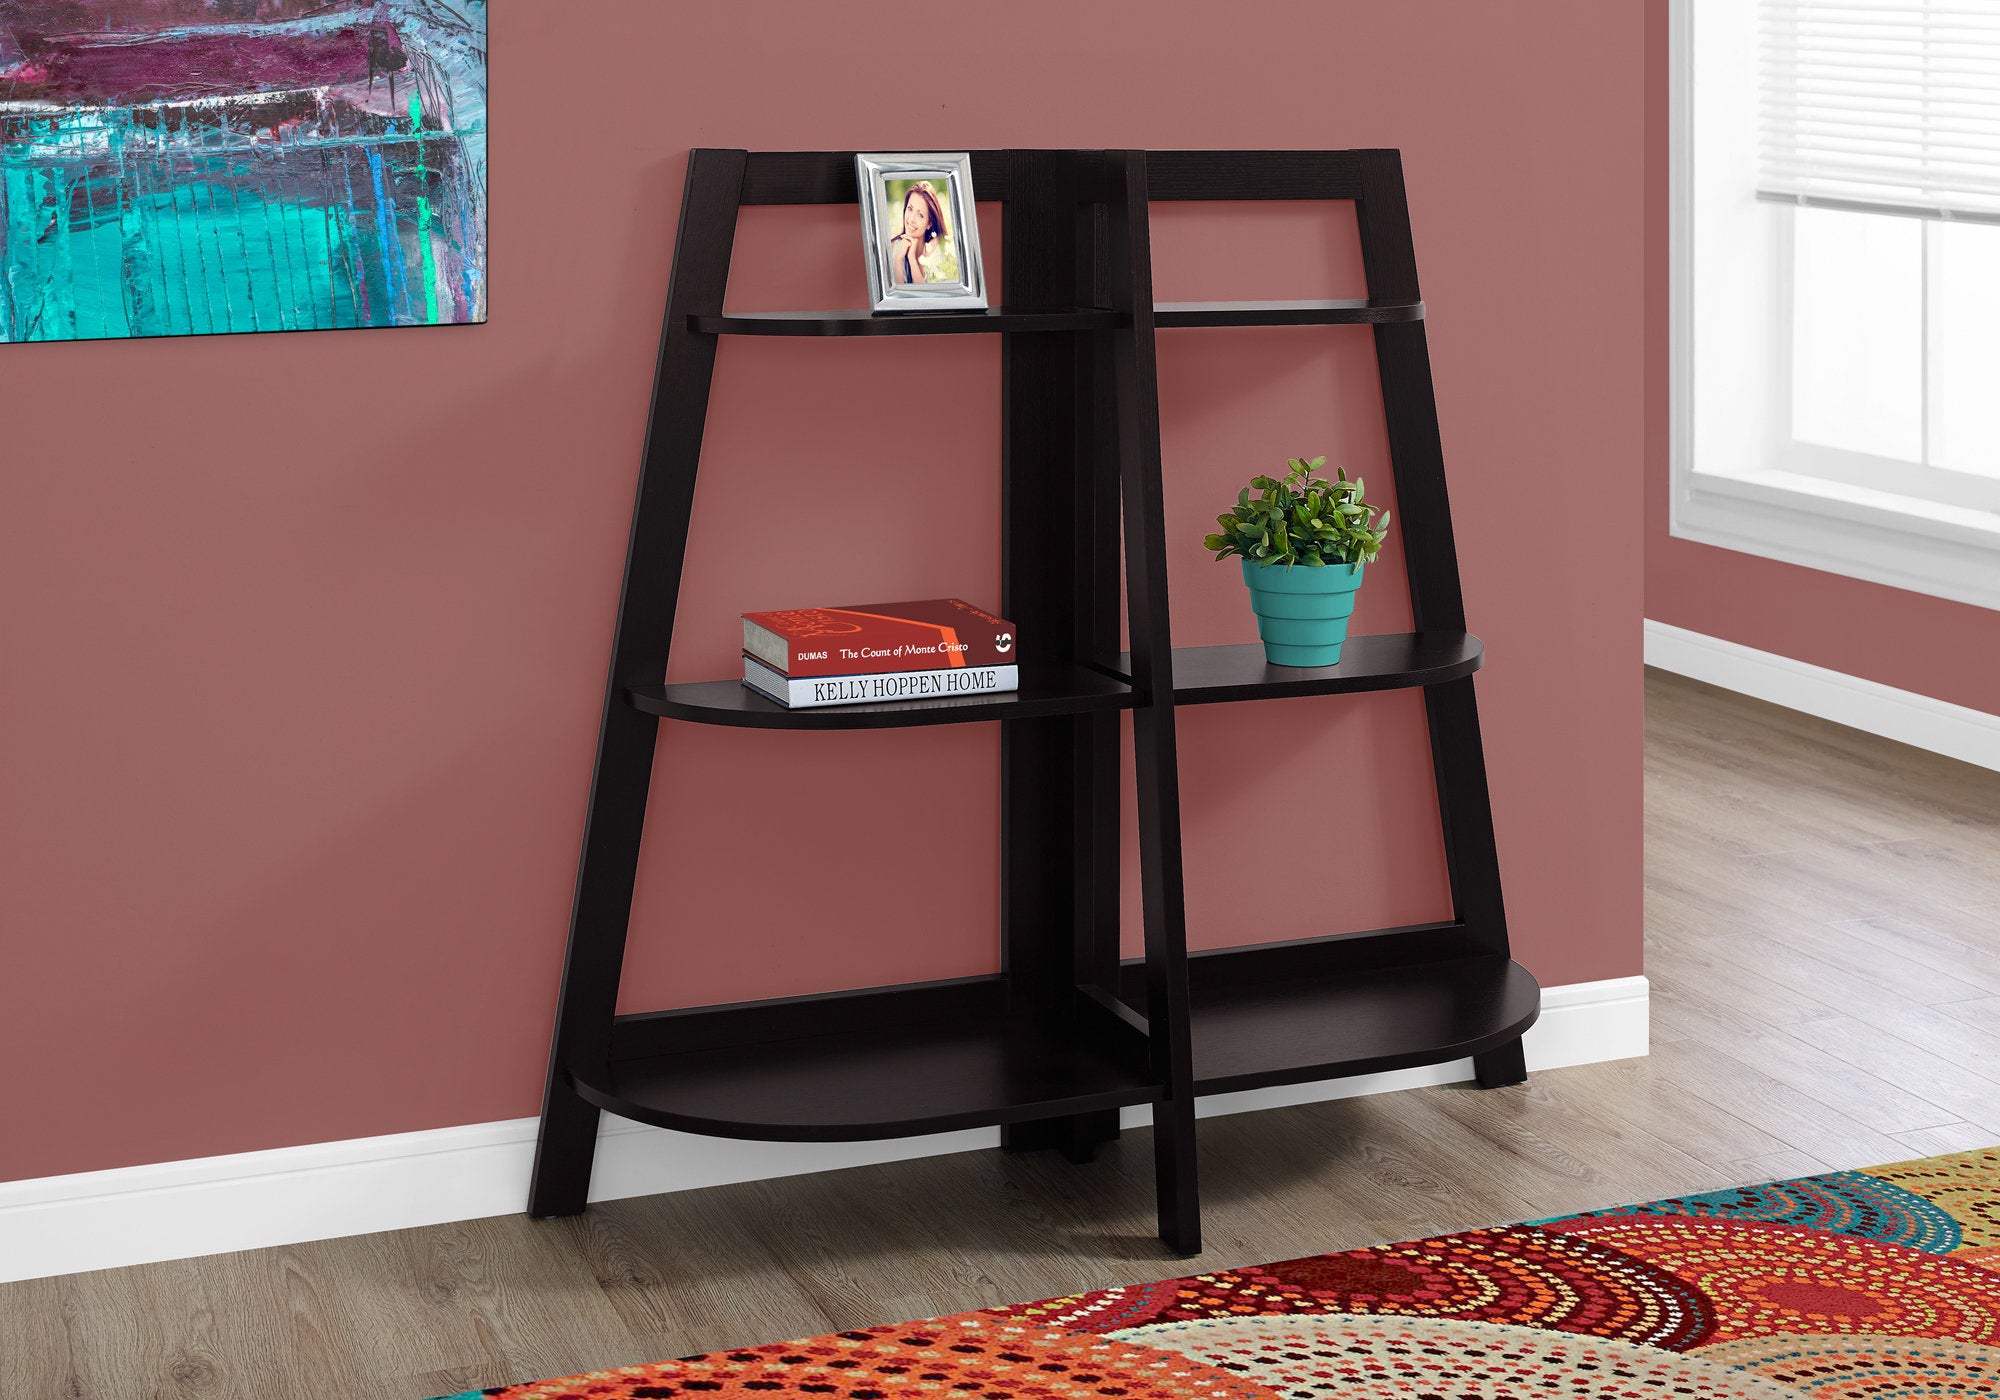 MN-522426    Bookshelf, Bookcase, Etagere, 3 Tier, 48"H, Office, Bedroom, Brown Laminate, Contemporary, Modern